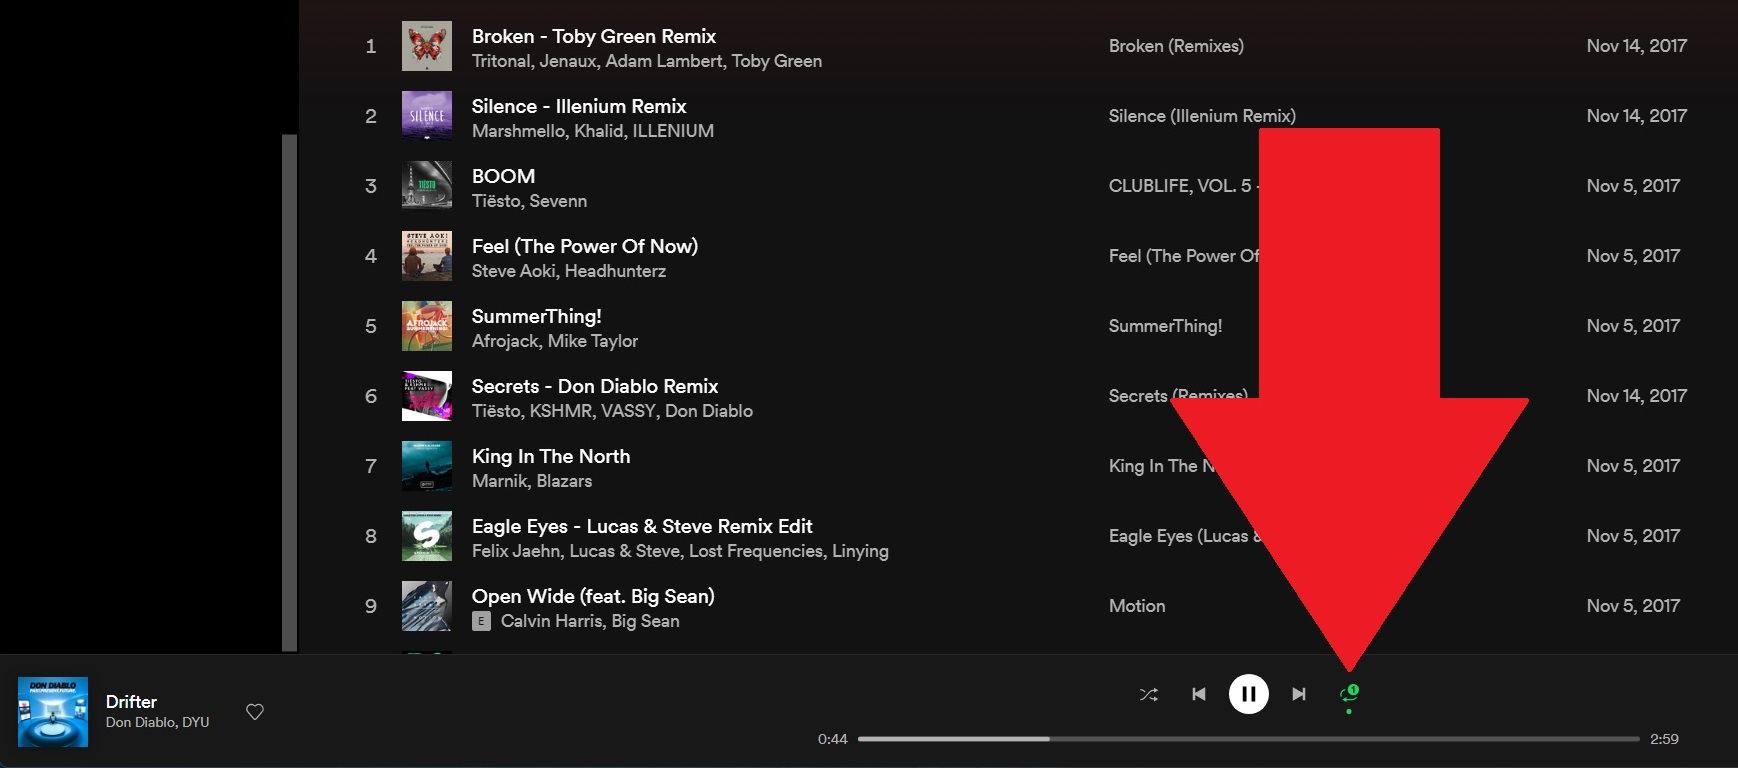 How to put a song on repeat on Spotify